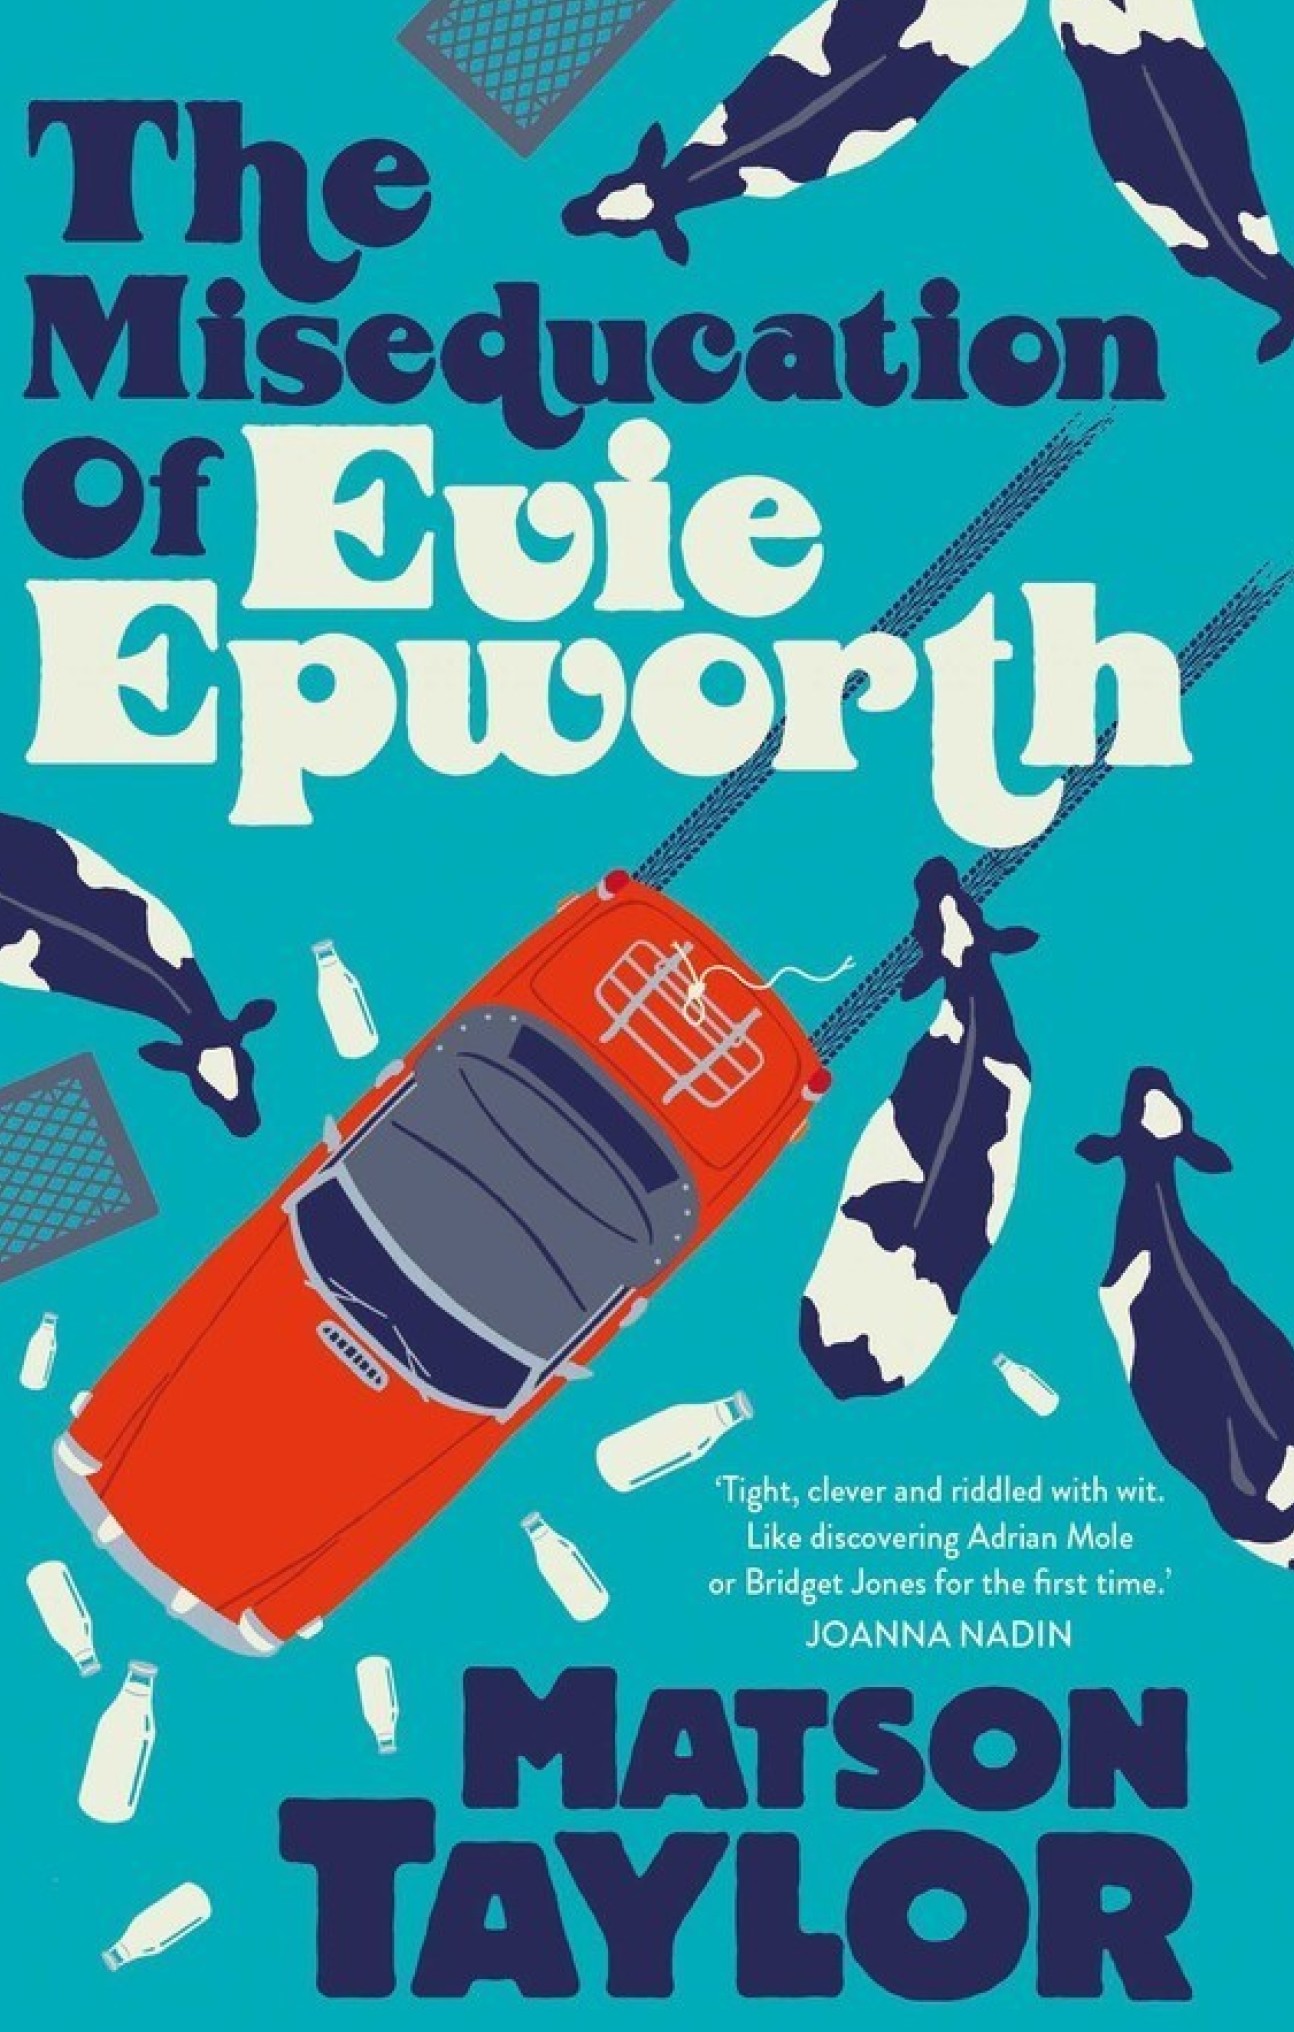 The front cover of Matson Taylor's book 'The Miseducation of Evie Epworth'